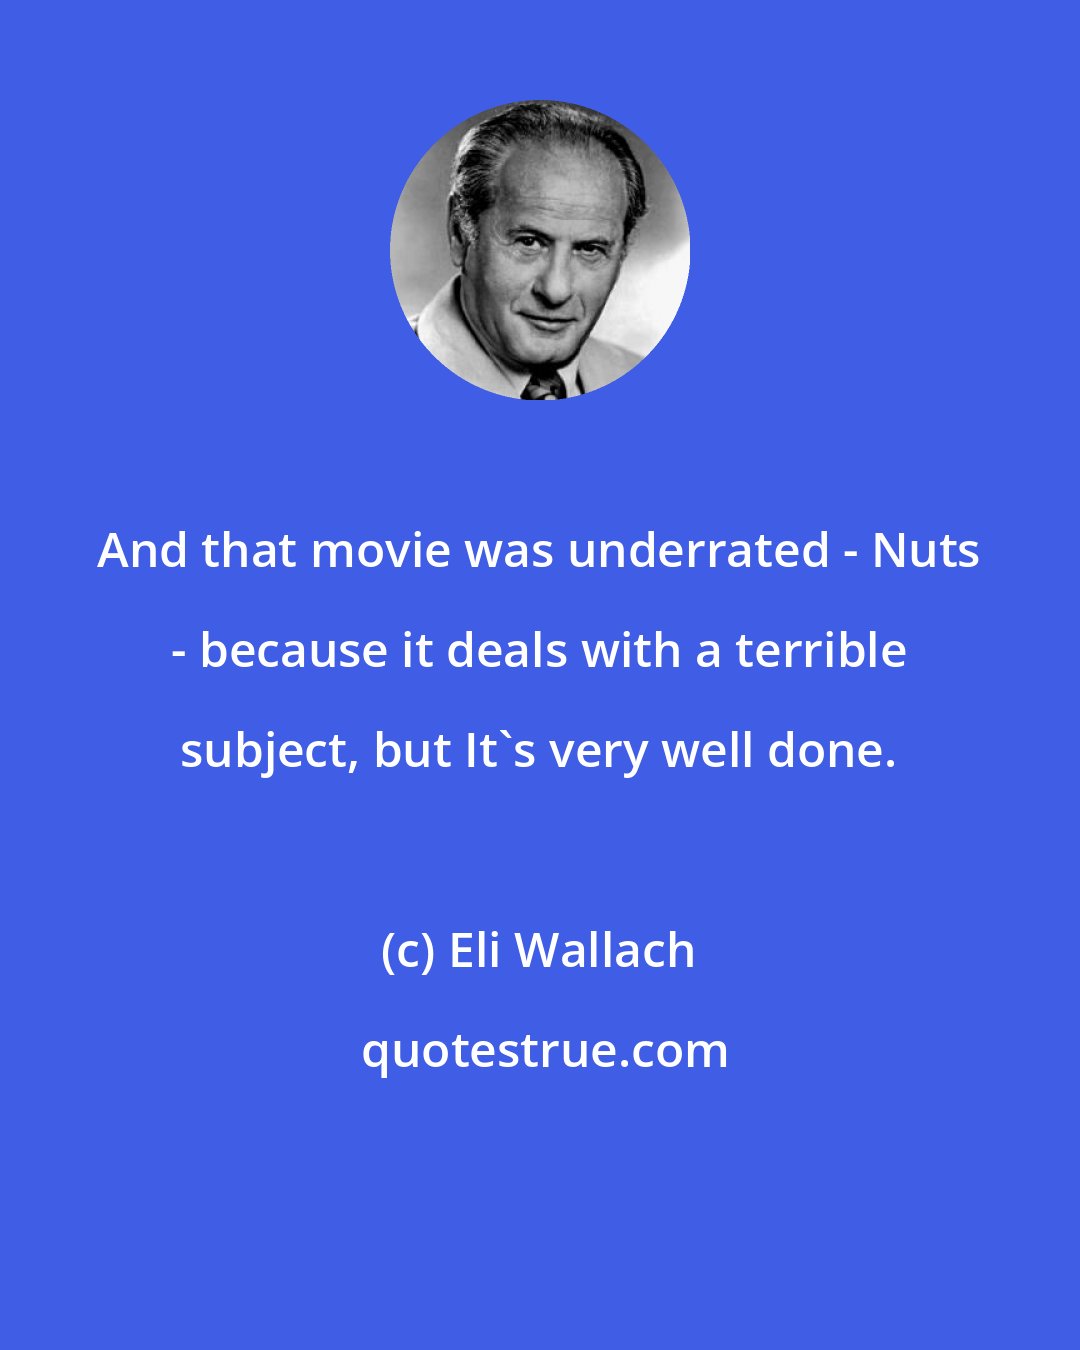 Eli Wallach: And that movie was underrated - Nuts - because it deals with a terrible subject, but It's very well done.